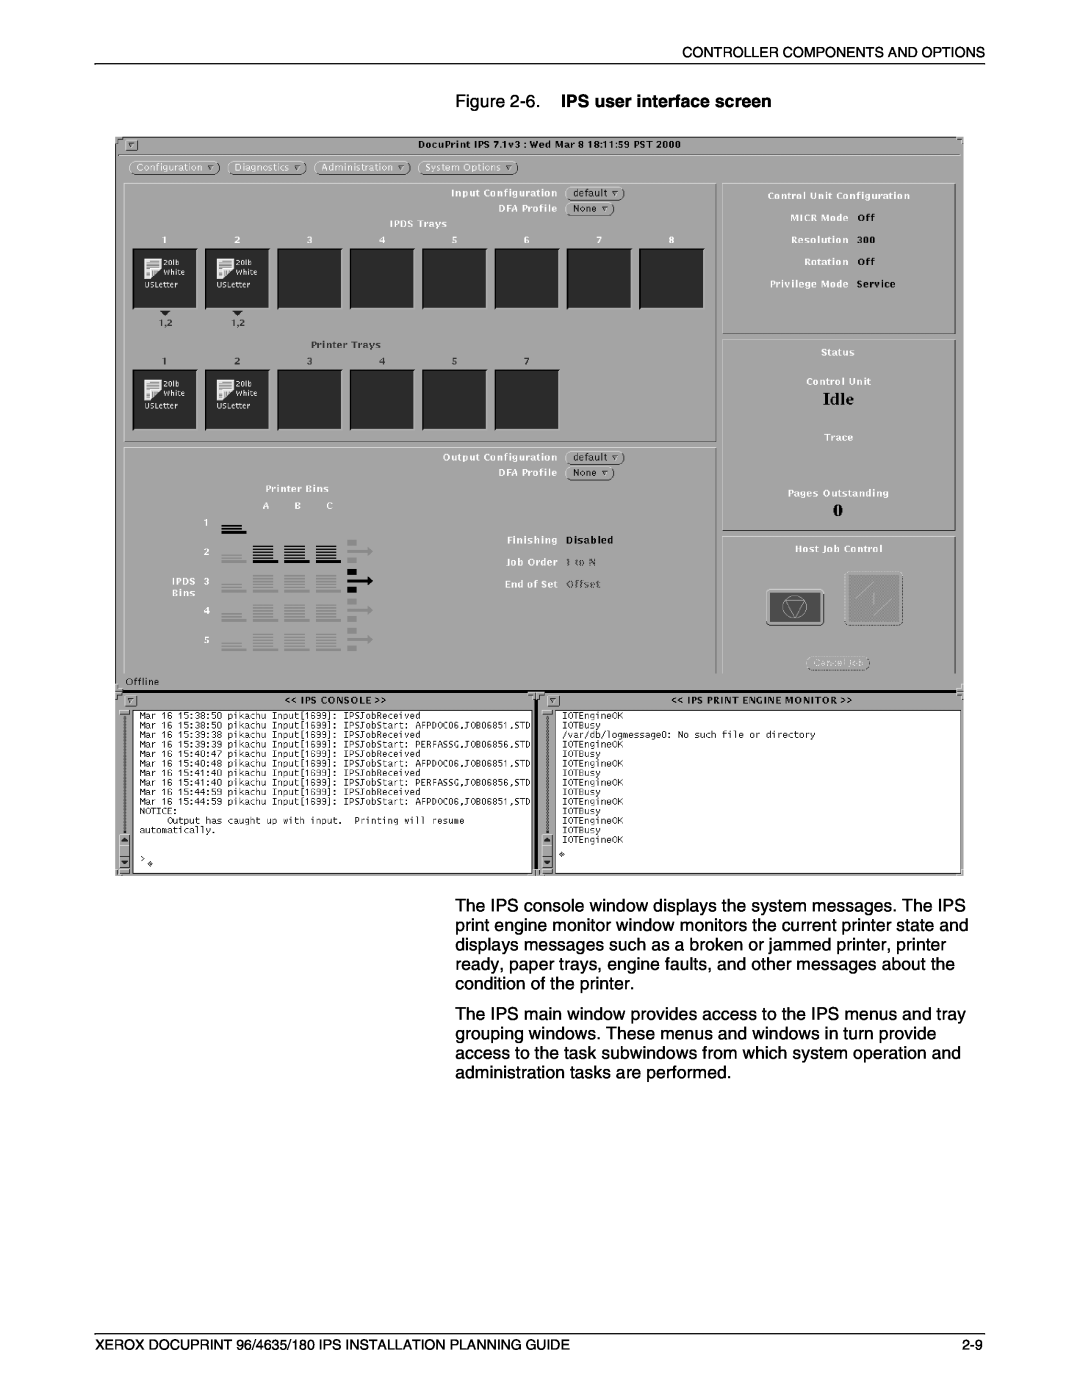 Xerox 180 IPS manual 6. IPS user interface screen, Controller Components And Options 